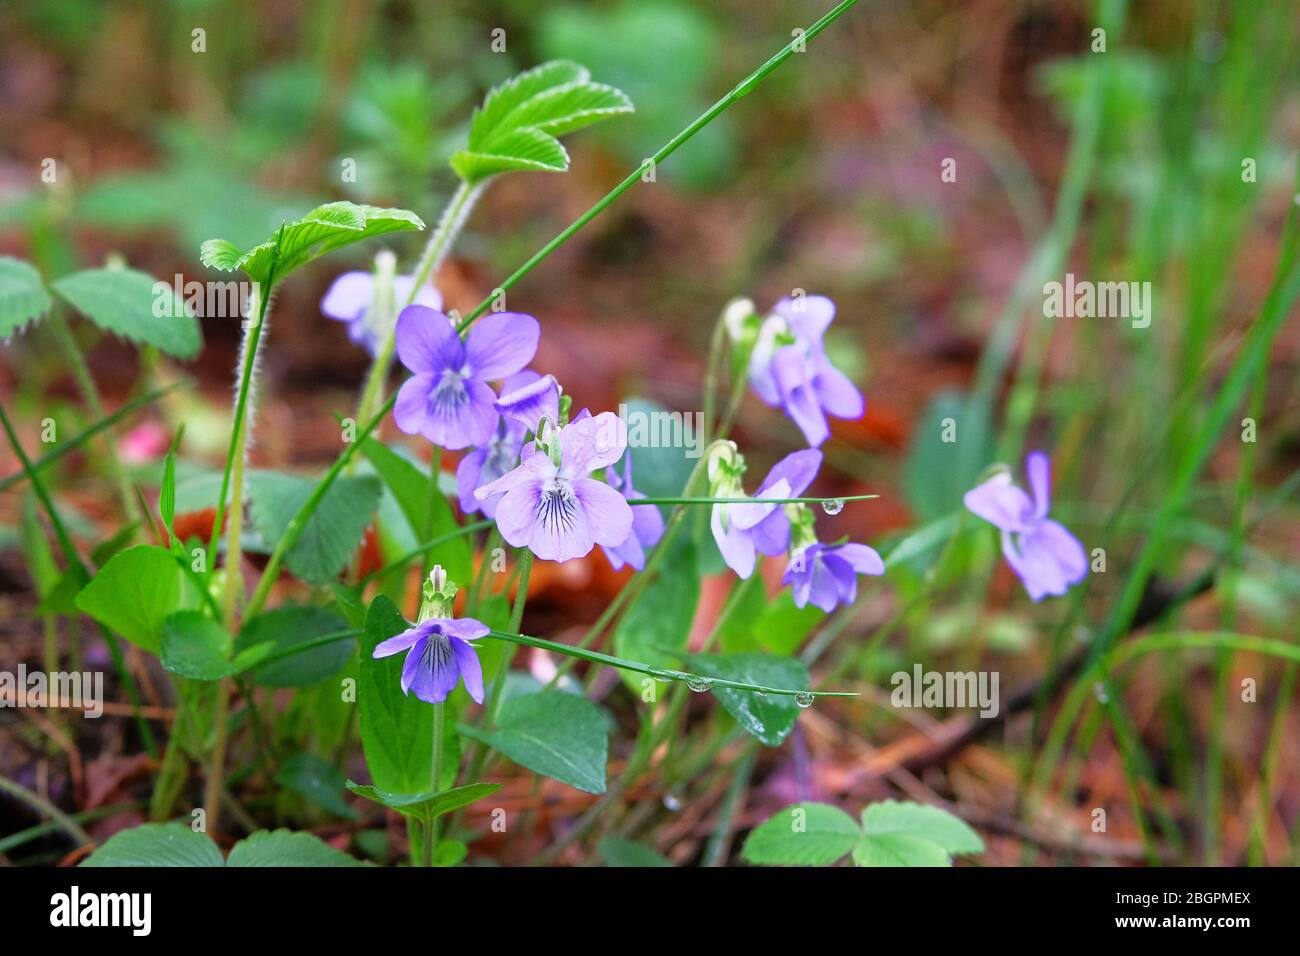 Spring blooming violet flowers. Wild field pansy, England, Europe. Dog-violet, soft focus. Stock Photo